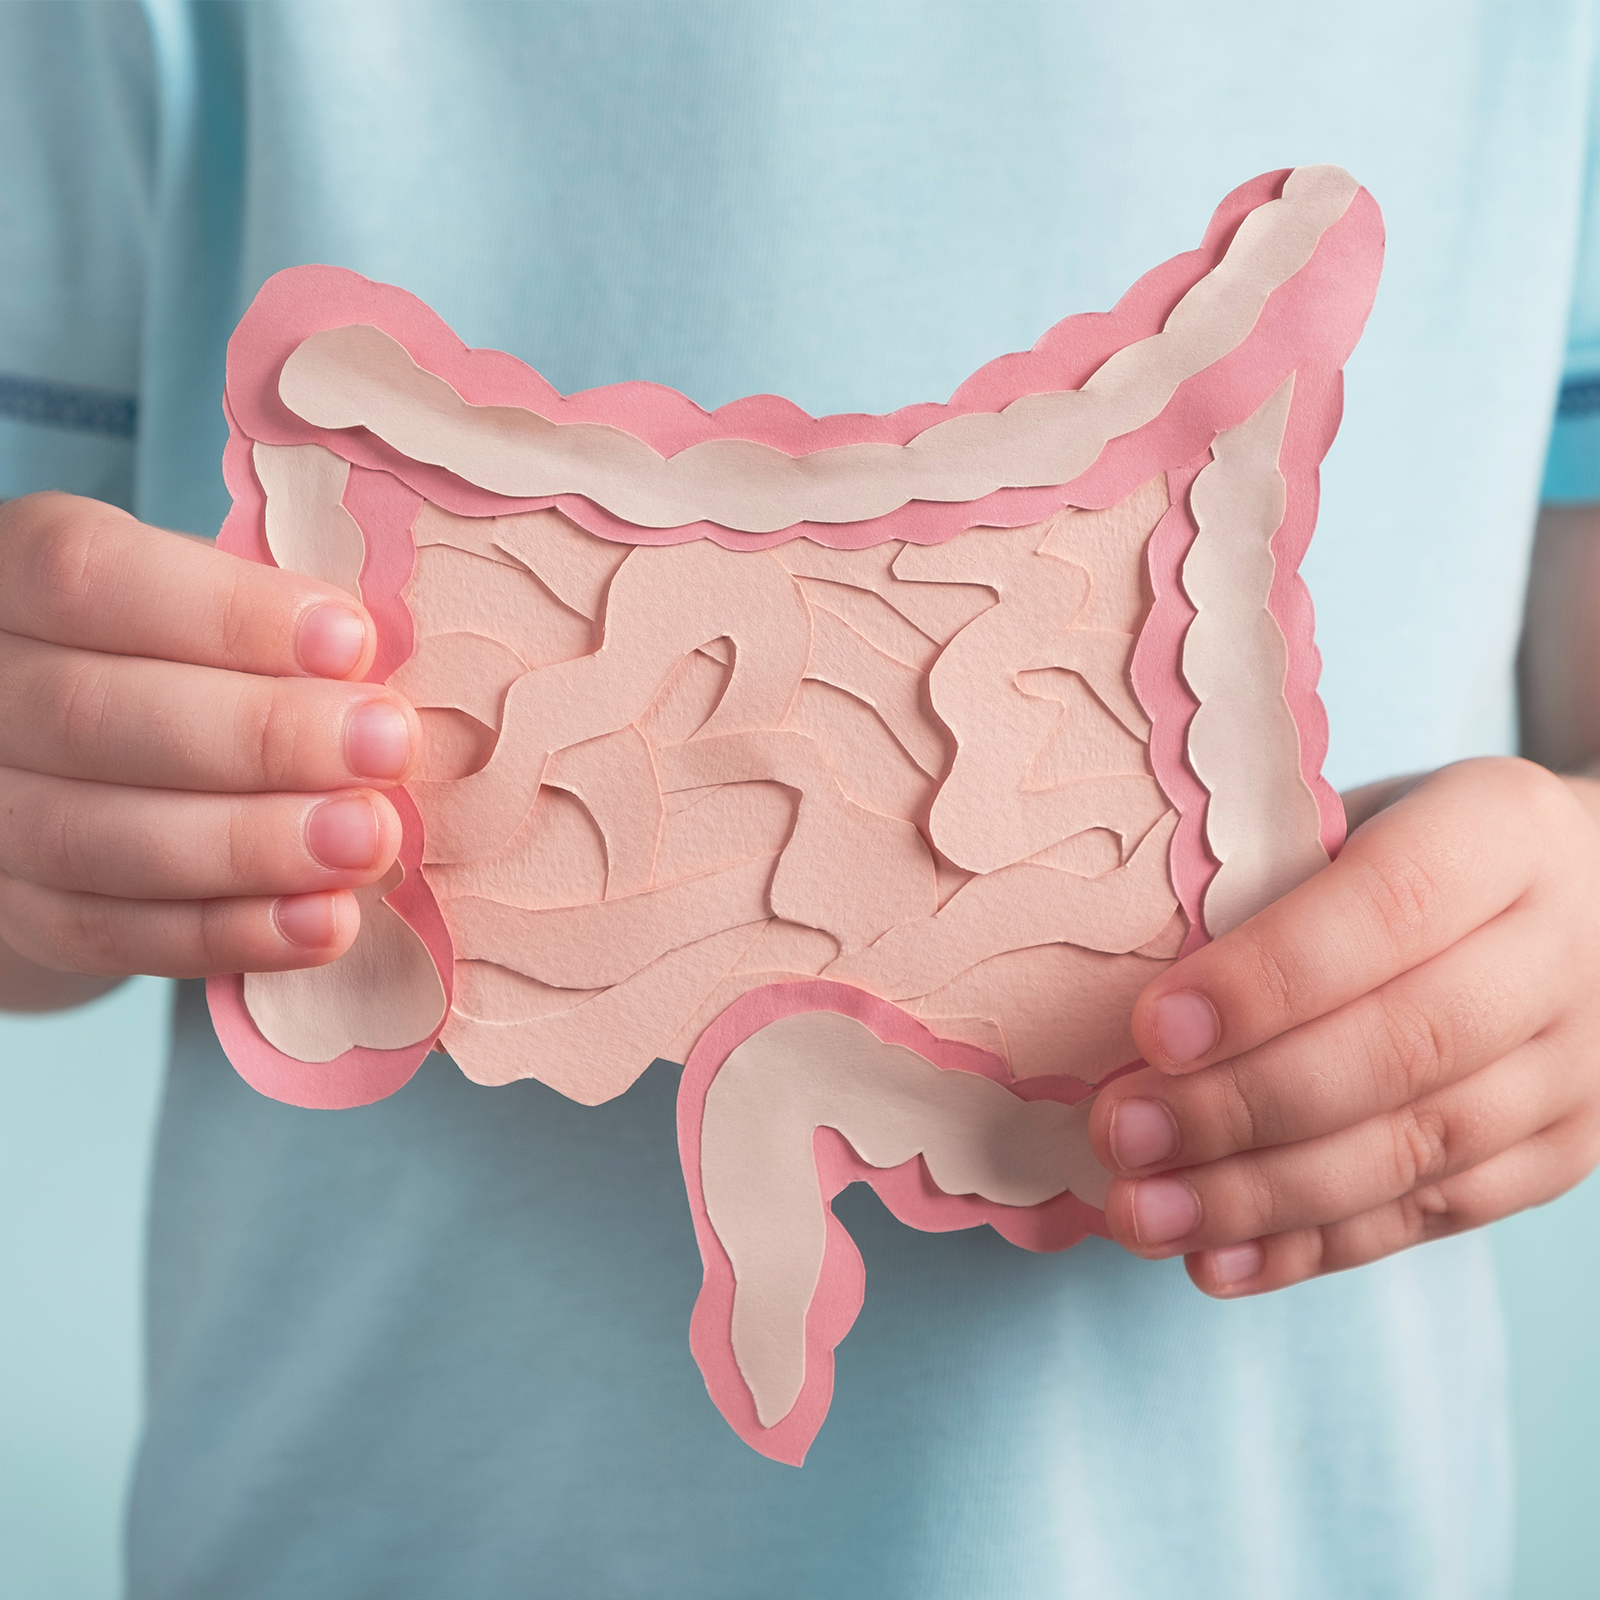 Young boy in blue t-shirt holding a paper intestine. Only his torso is pictured.